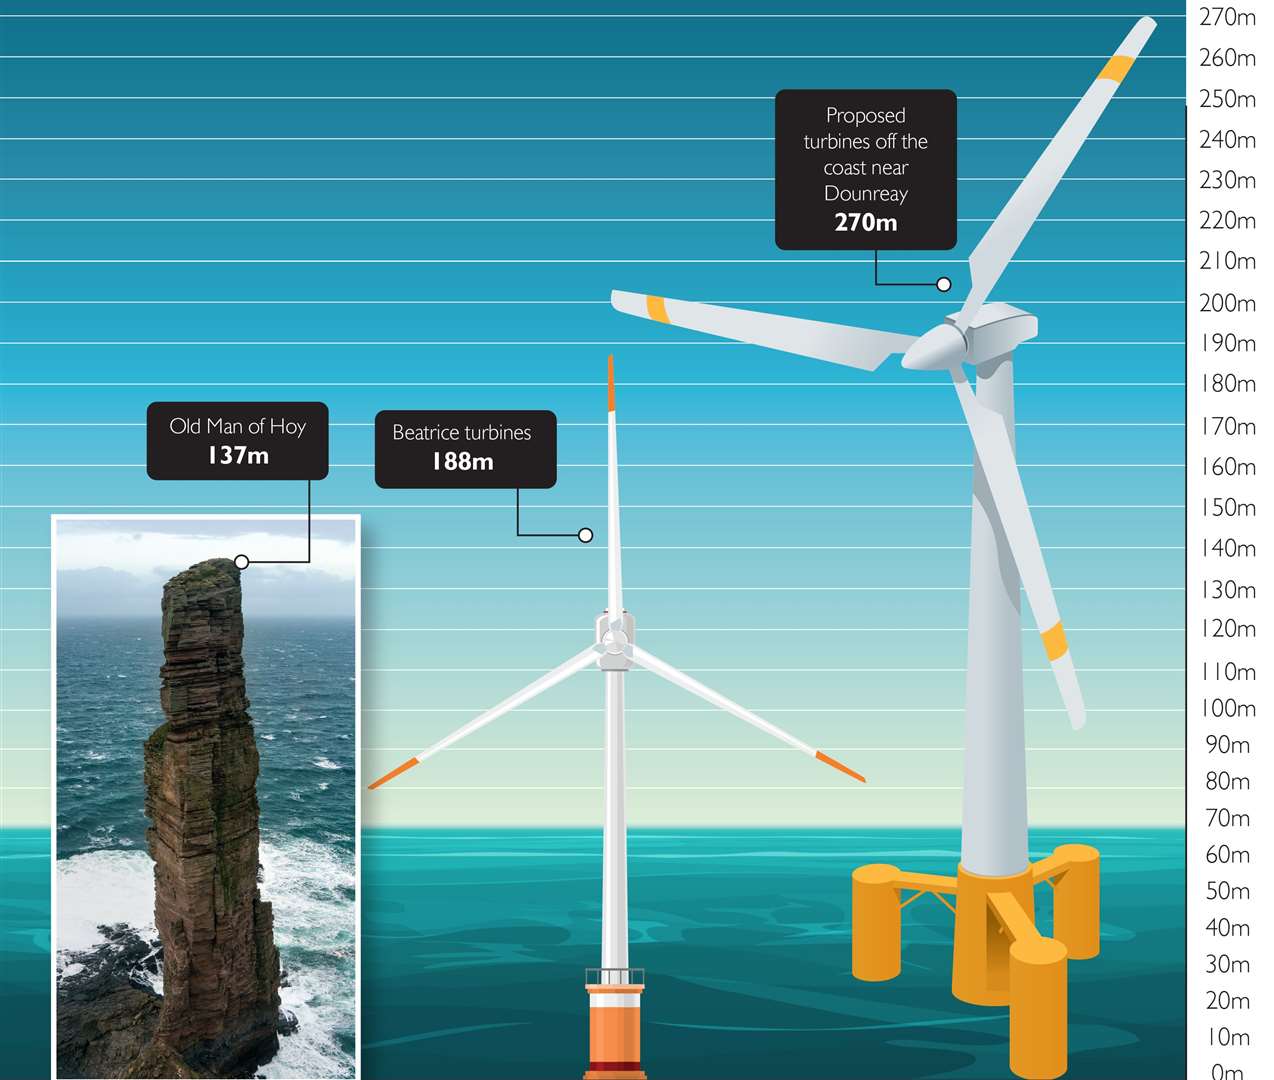 A graphic showing the relative heights of the Beatrice and proposed Dounreay offshore turbines alongside the Old Man of Hoy sea-stack.